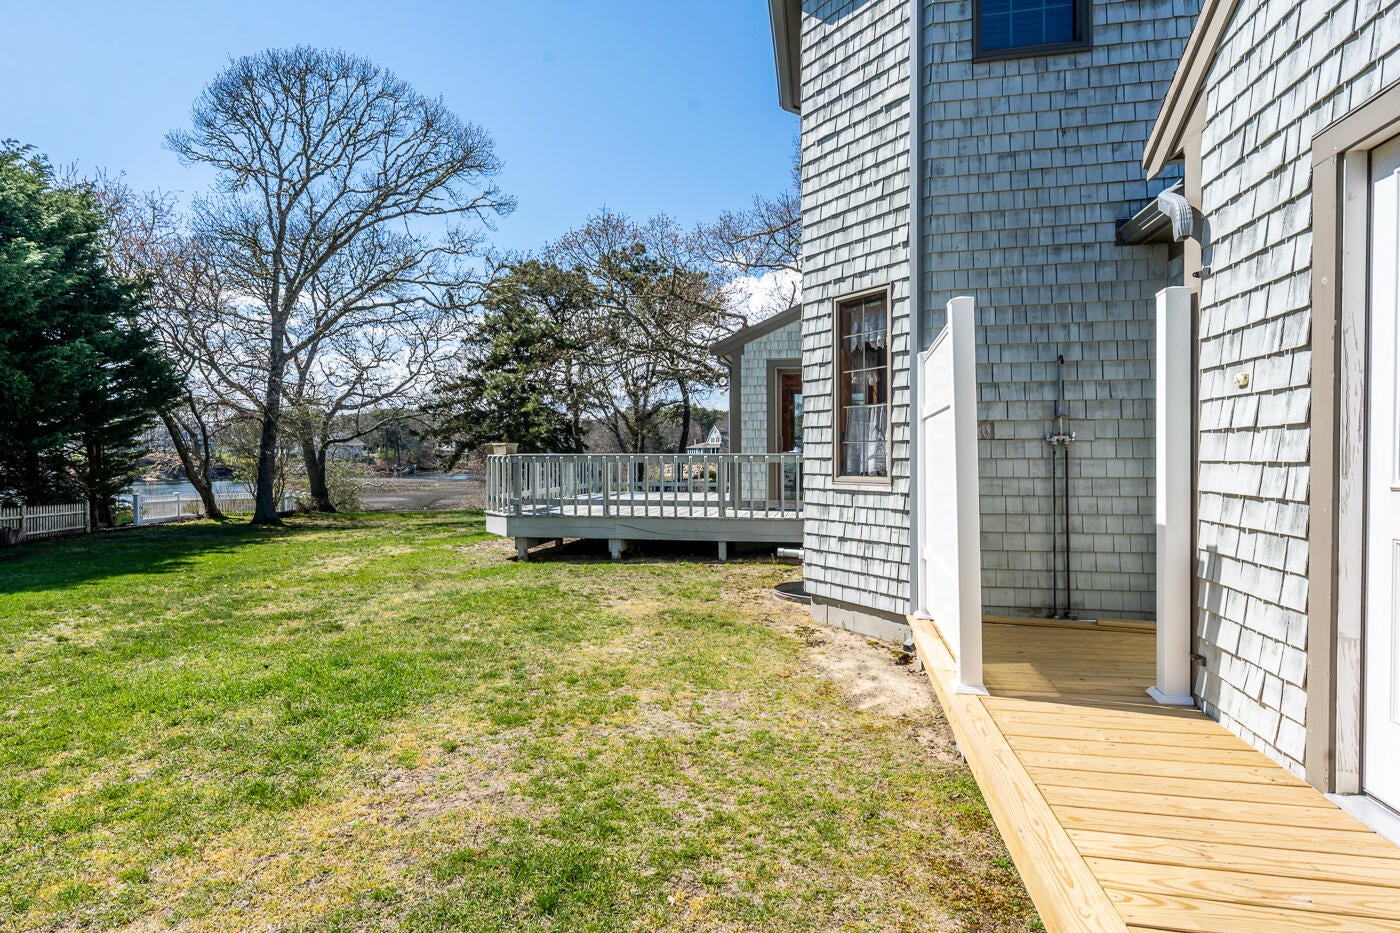 7 Shoal Hope Drive, West Harwich, Massachusetts, 02671, United States, 4 Bedrooms Bedrooms, ,2 BathroomsBathrooms,Residential,For Sale,7 Shoal Hope Drive,1260541